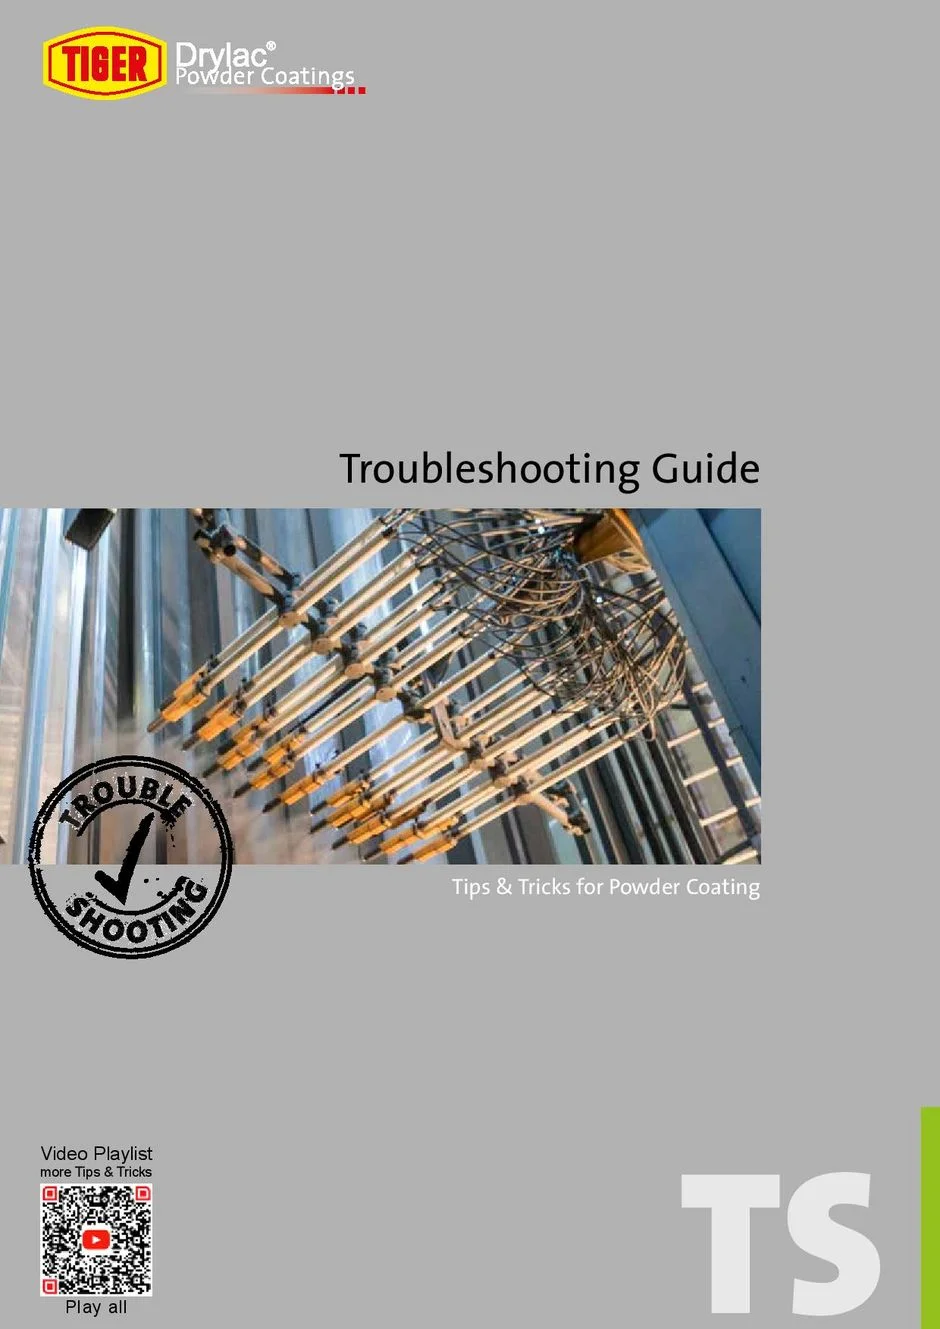 Open Troubleshooting Guide